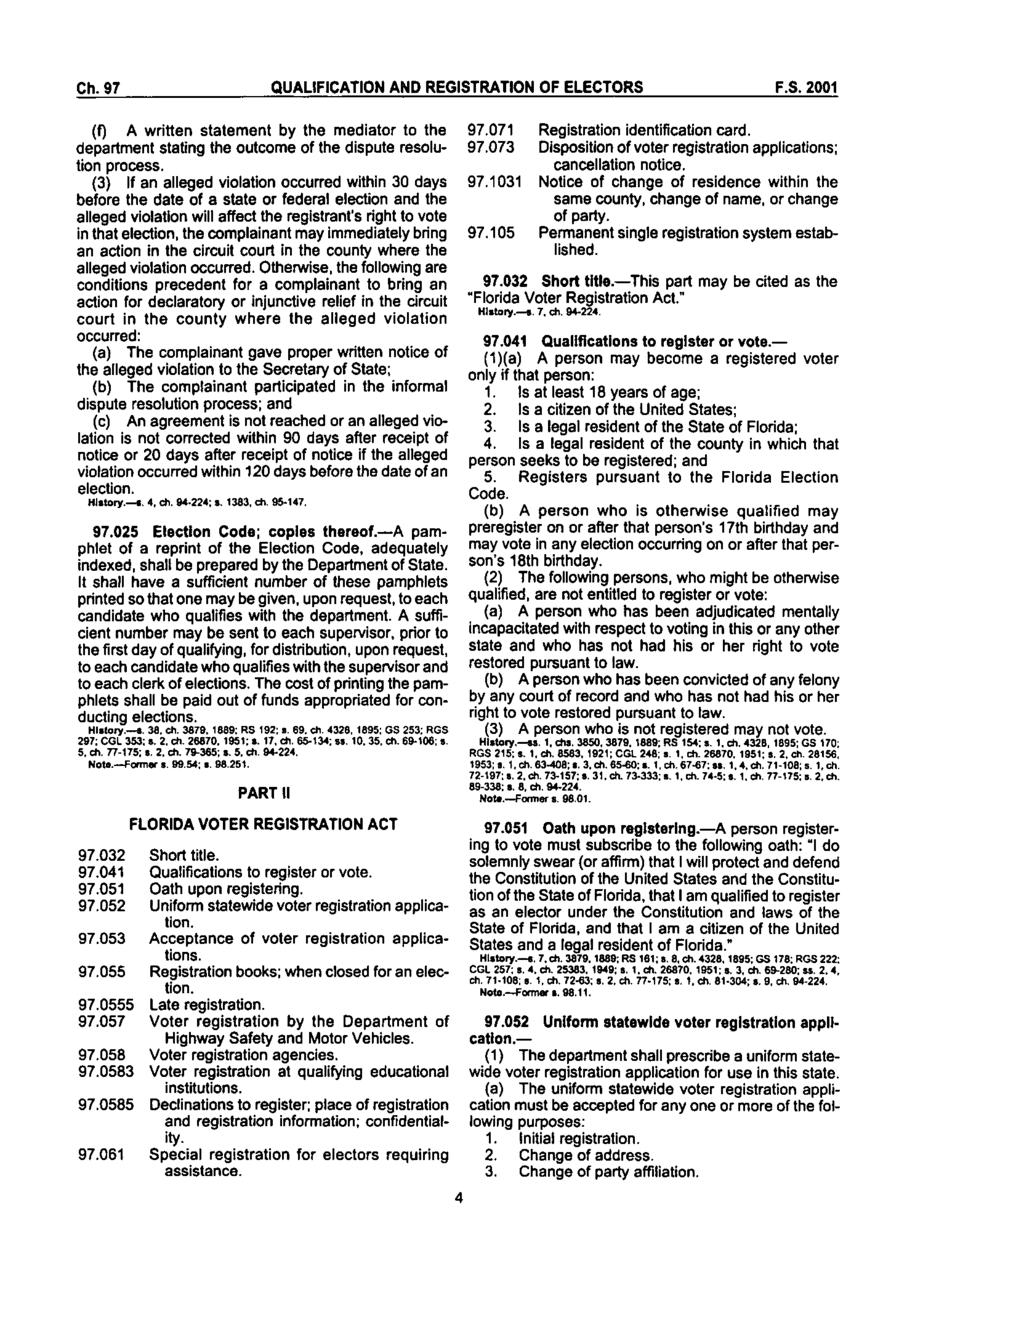 Ch.97 QUALIFICATION AND REGISTRATION OF ELECTORS F.S.2001 (I) A written statement by the mediator to the department stating the outcome of the dispute resolution process.